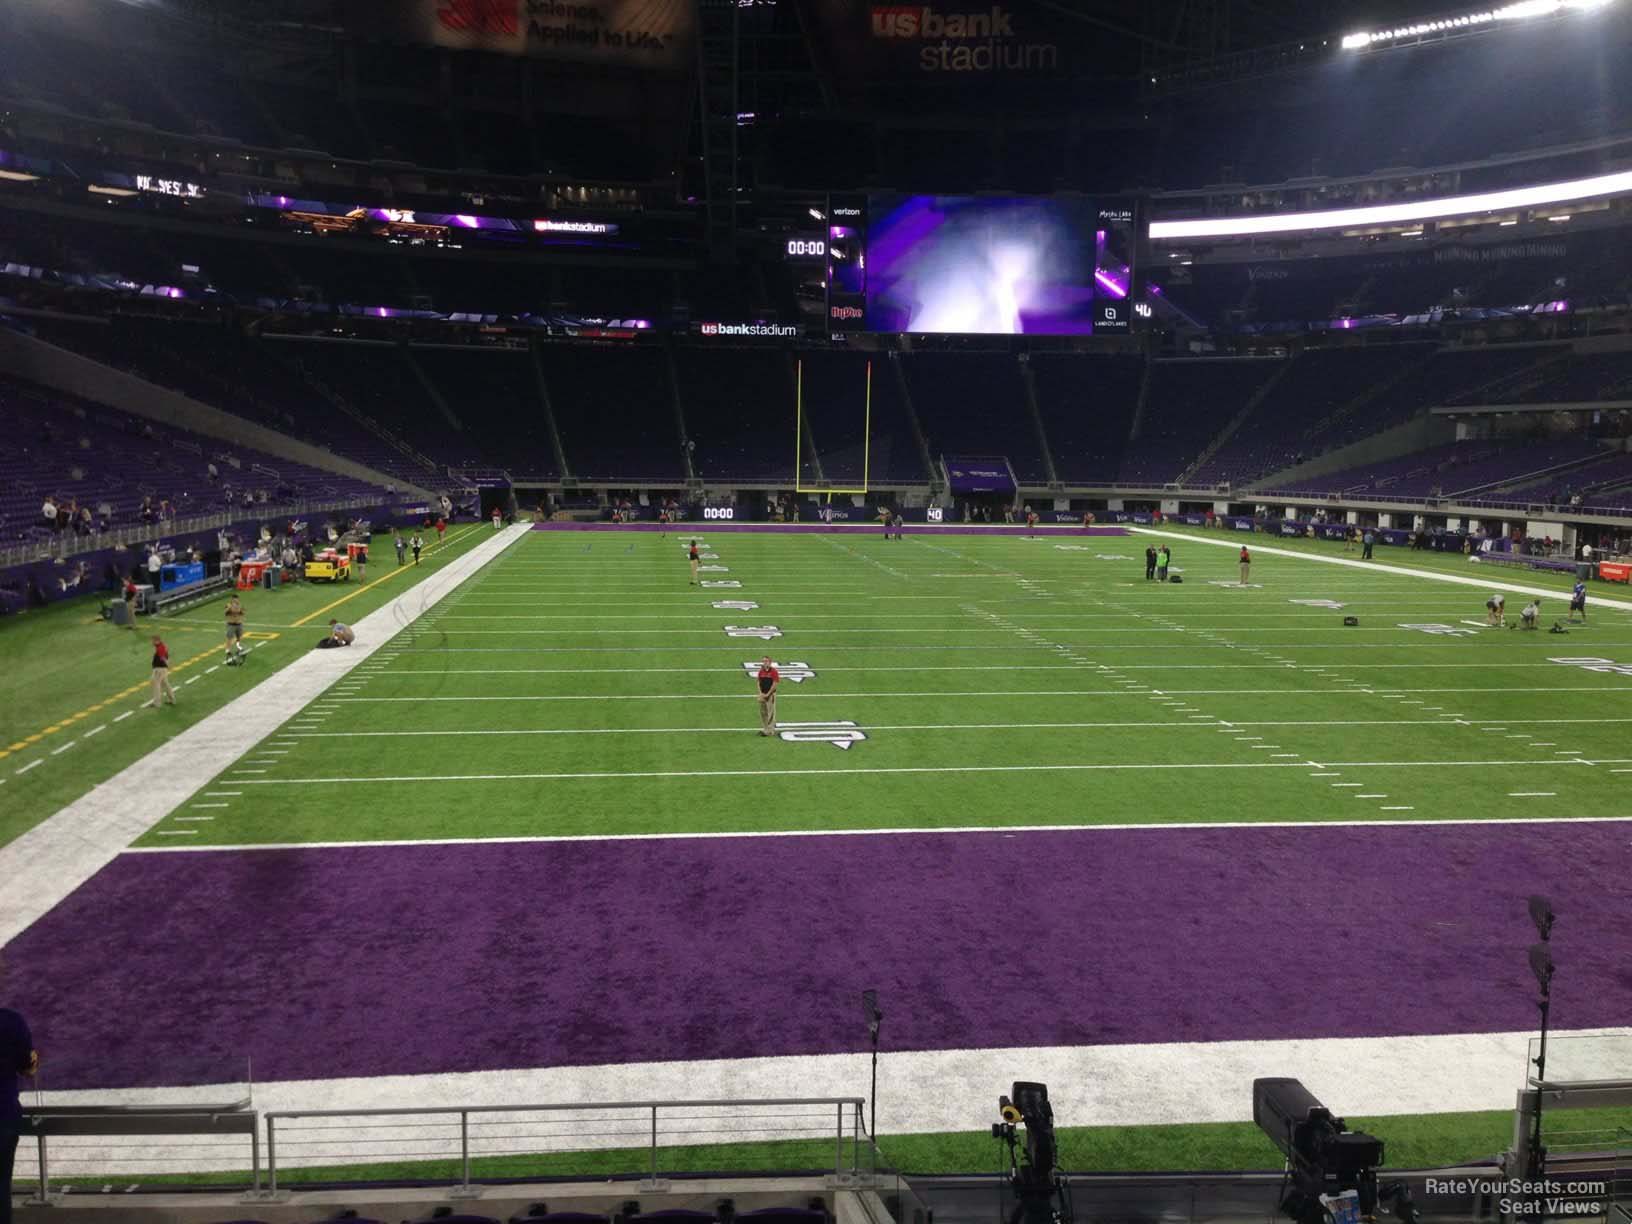 section 143, row 10 seat view  for football - u.s. bank stadium